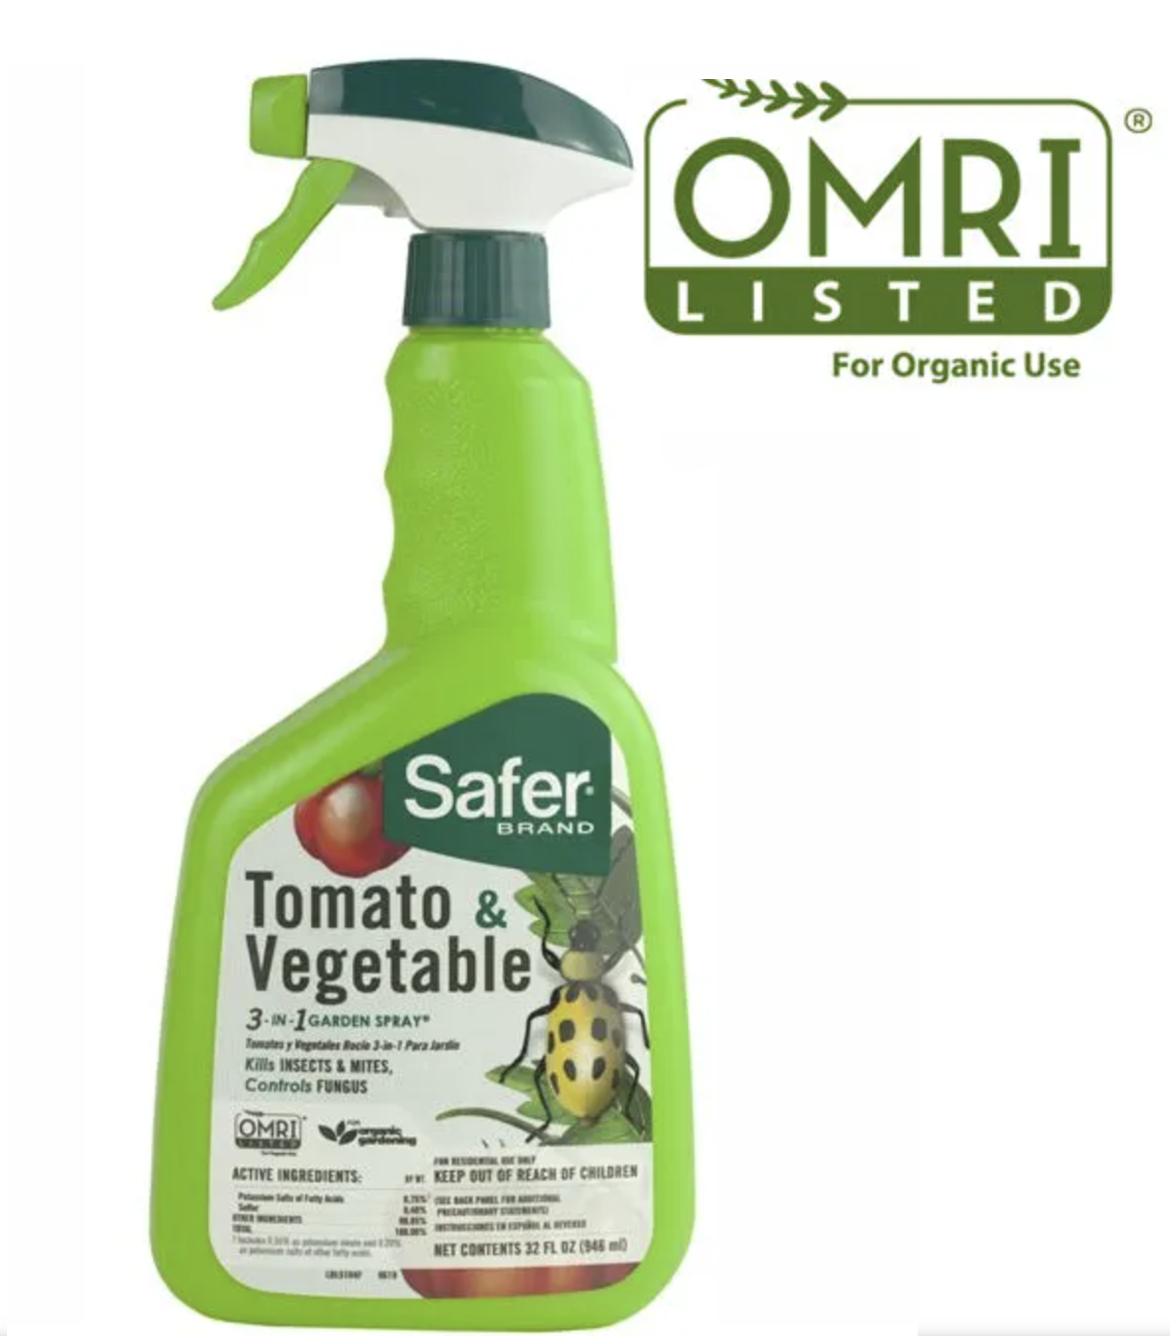 Tomato And Vegetable Insect, Disease & Mite Control, 32 oz